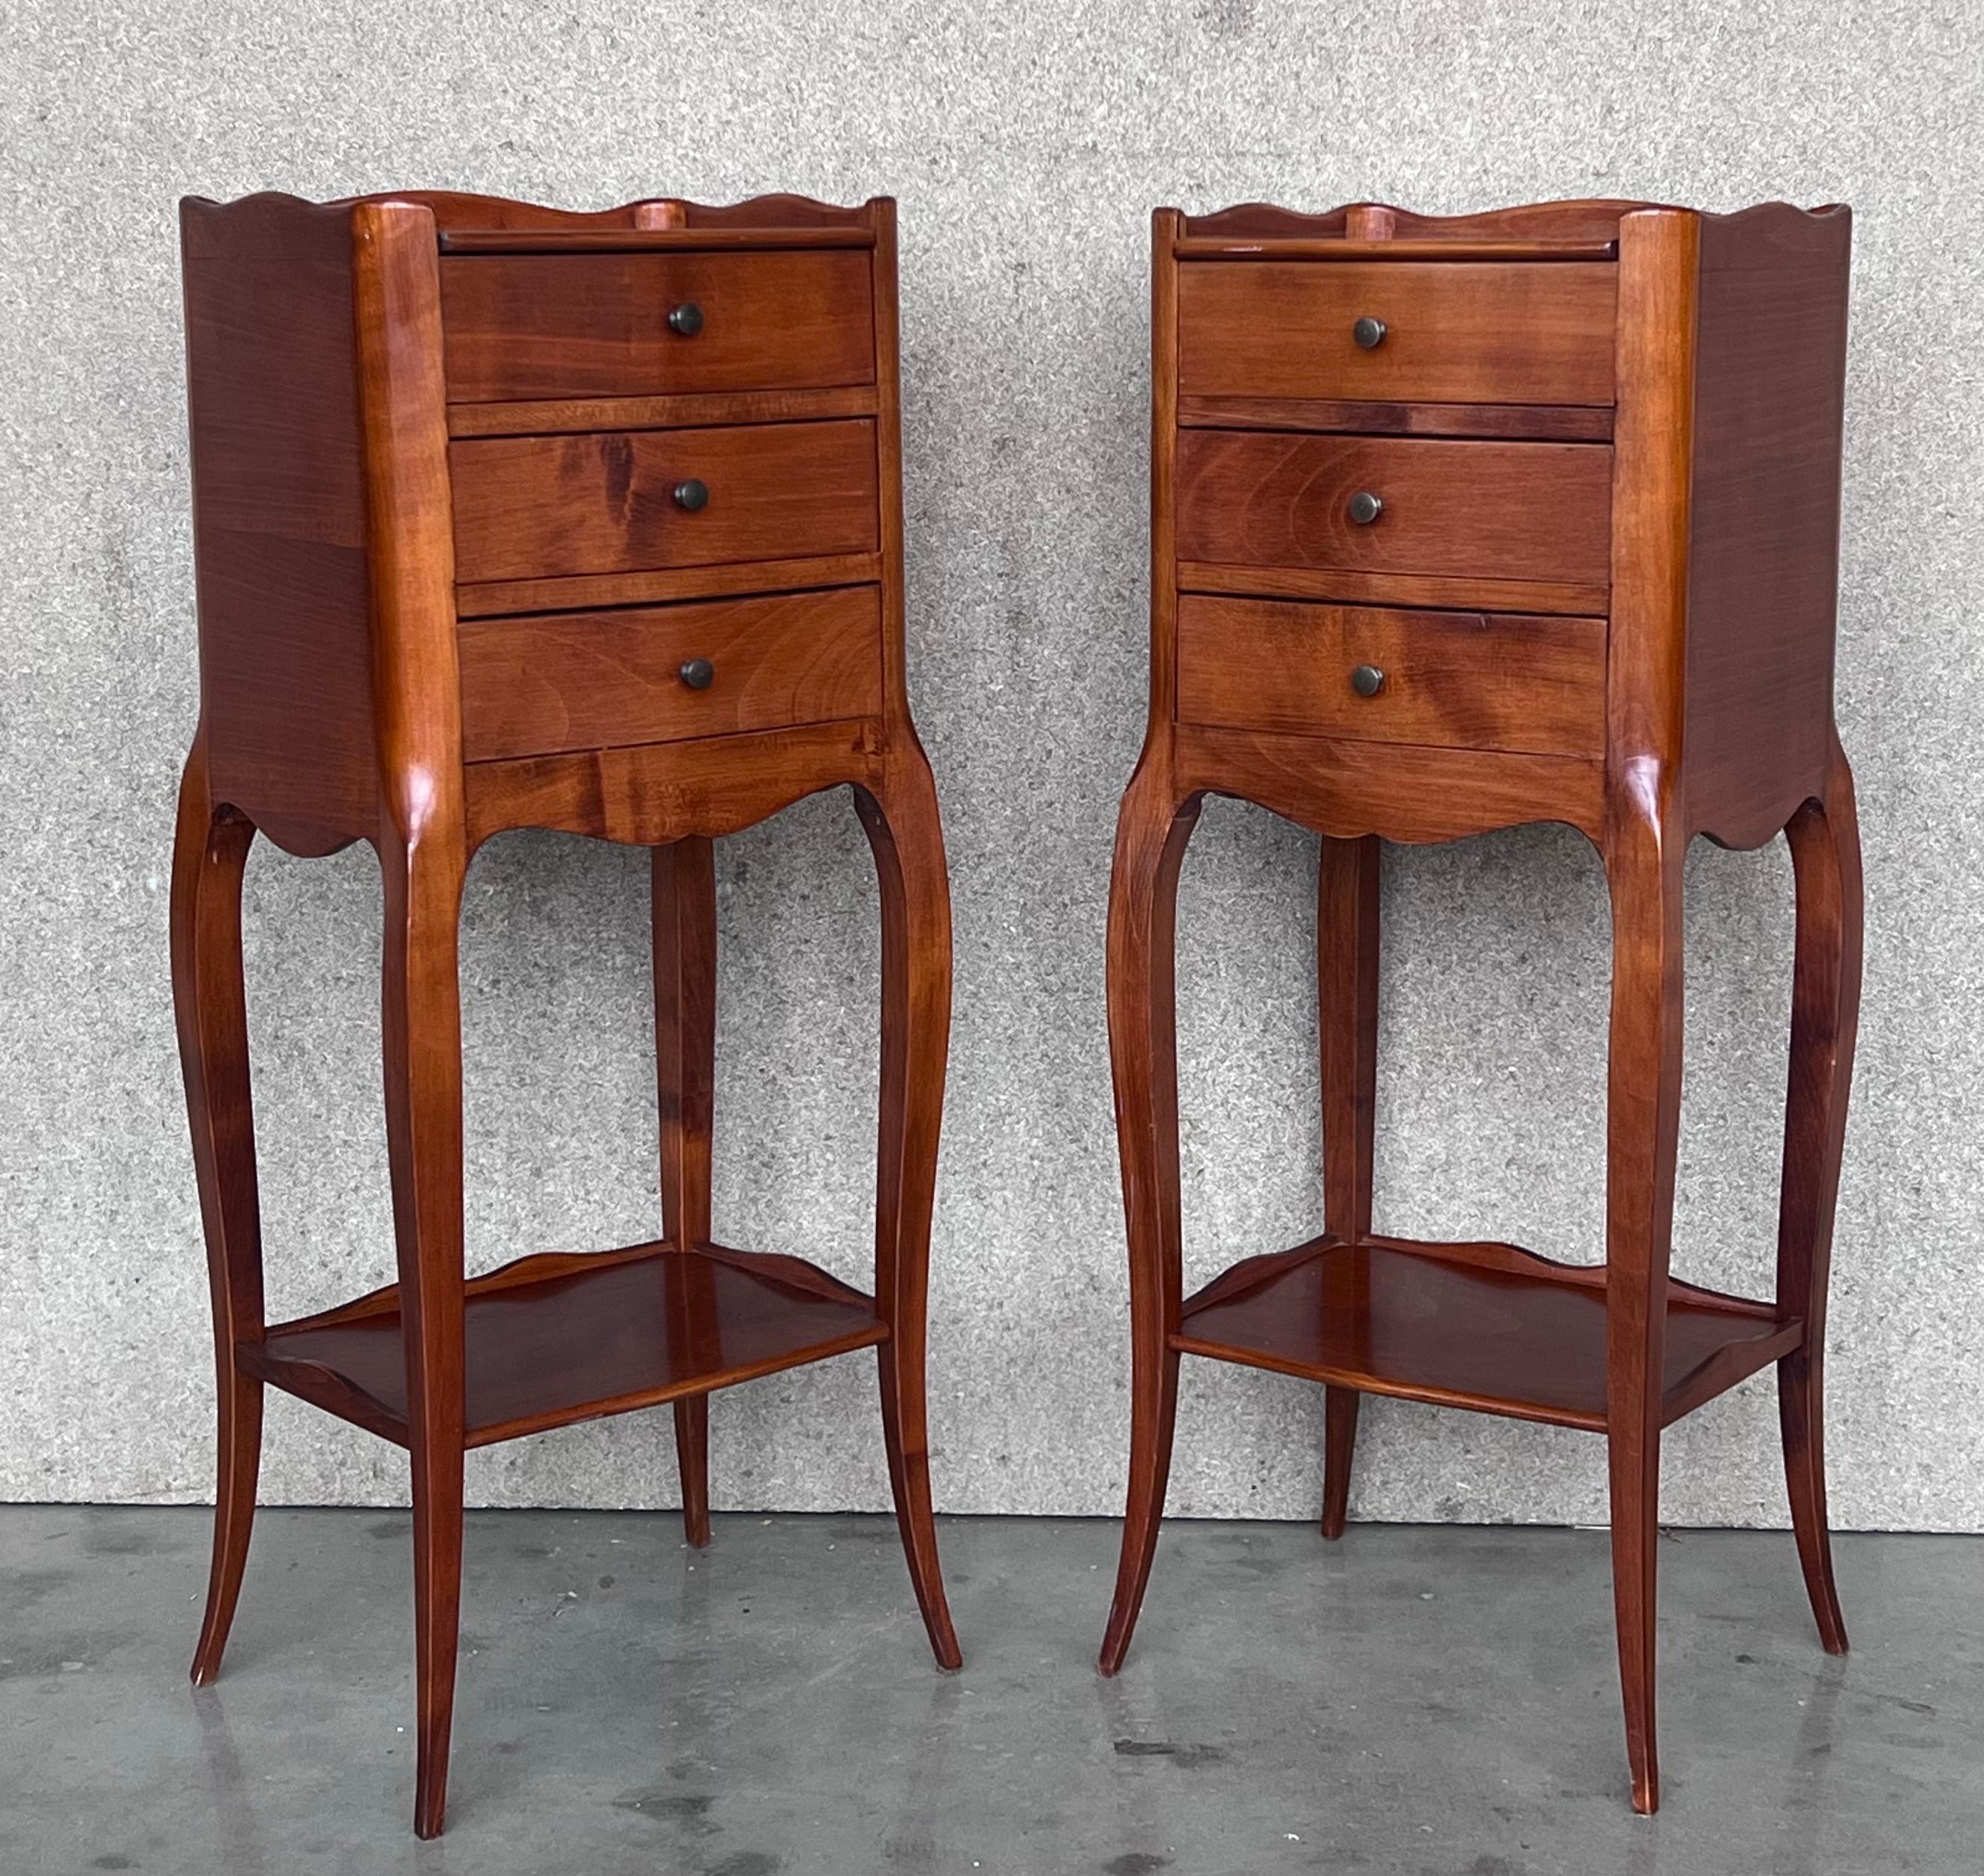 Pair of French Walnut Narrow Bedside Tables with Three Drawers In Good Condition For Sale In Miami, FL